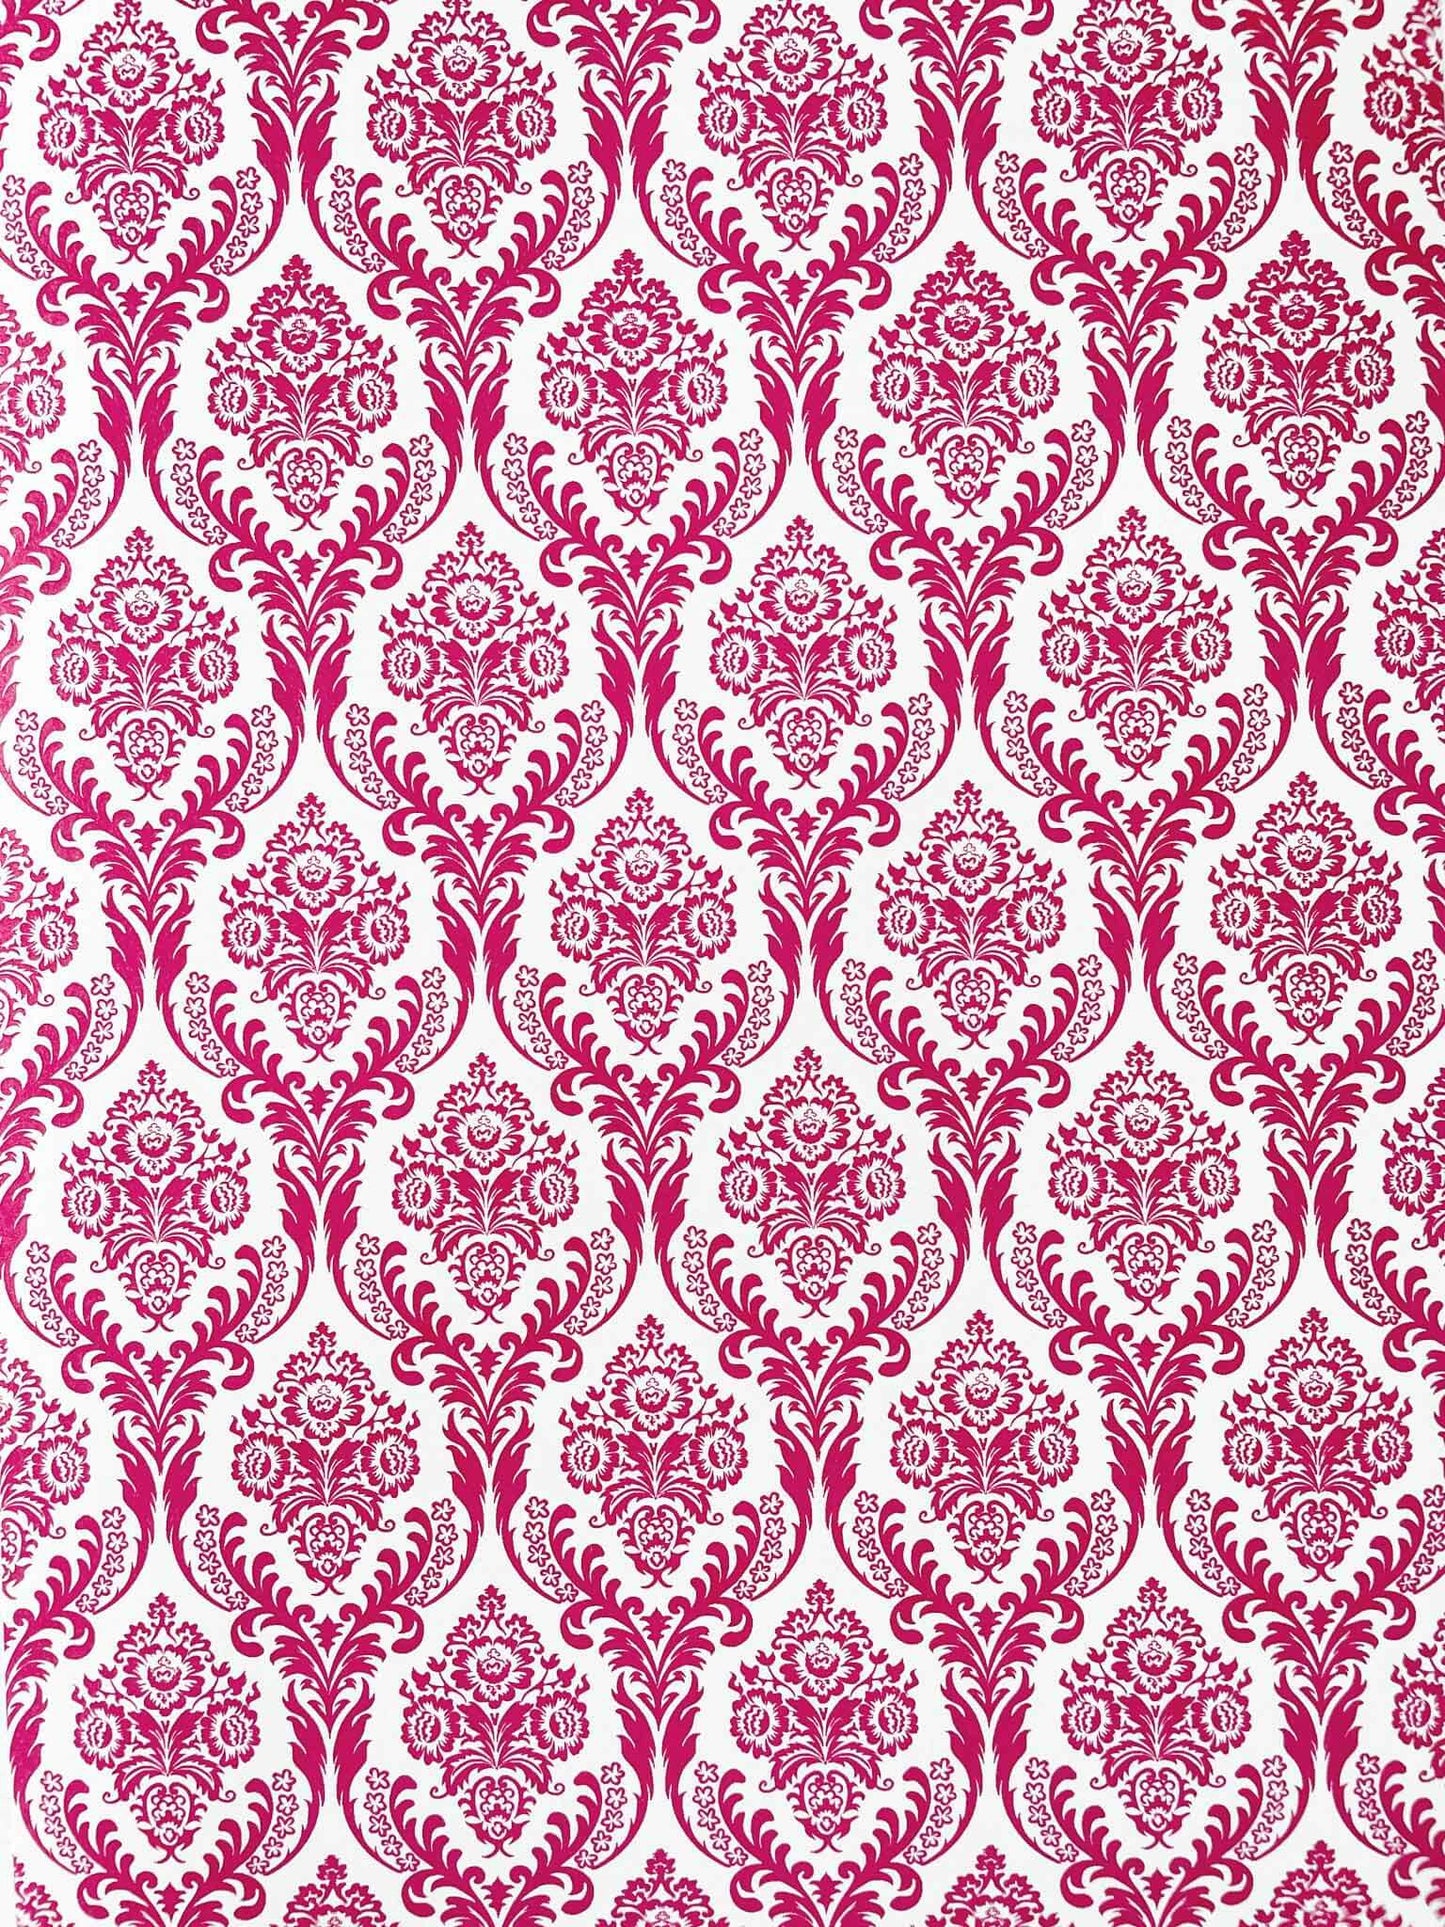 ascot-raspberry-red-and-white-vintage-patterned-paper